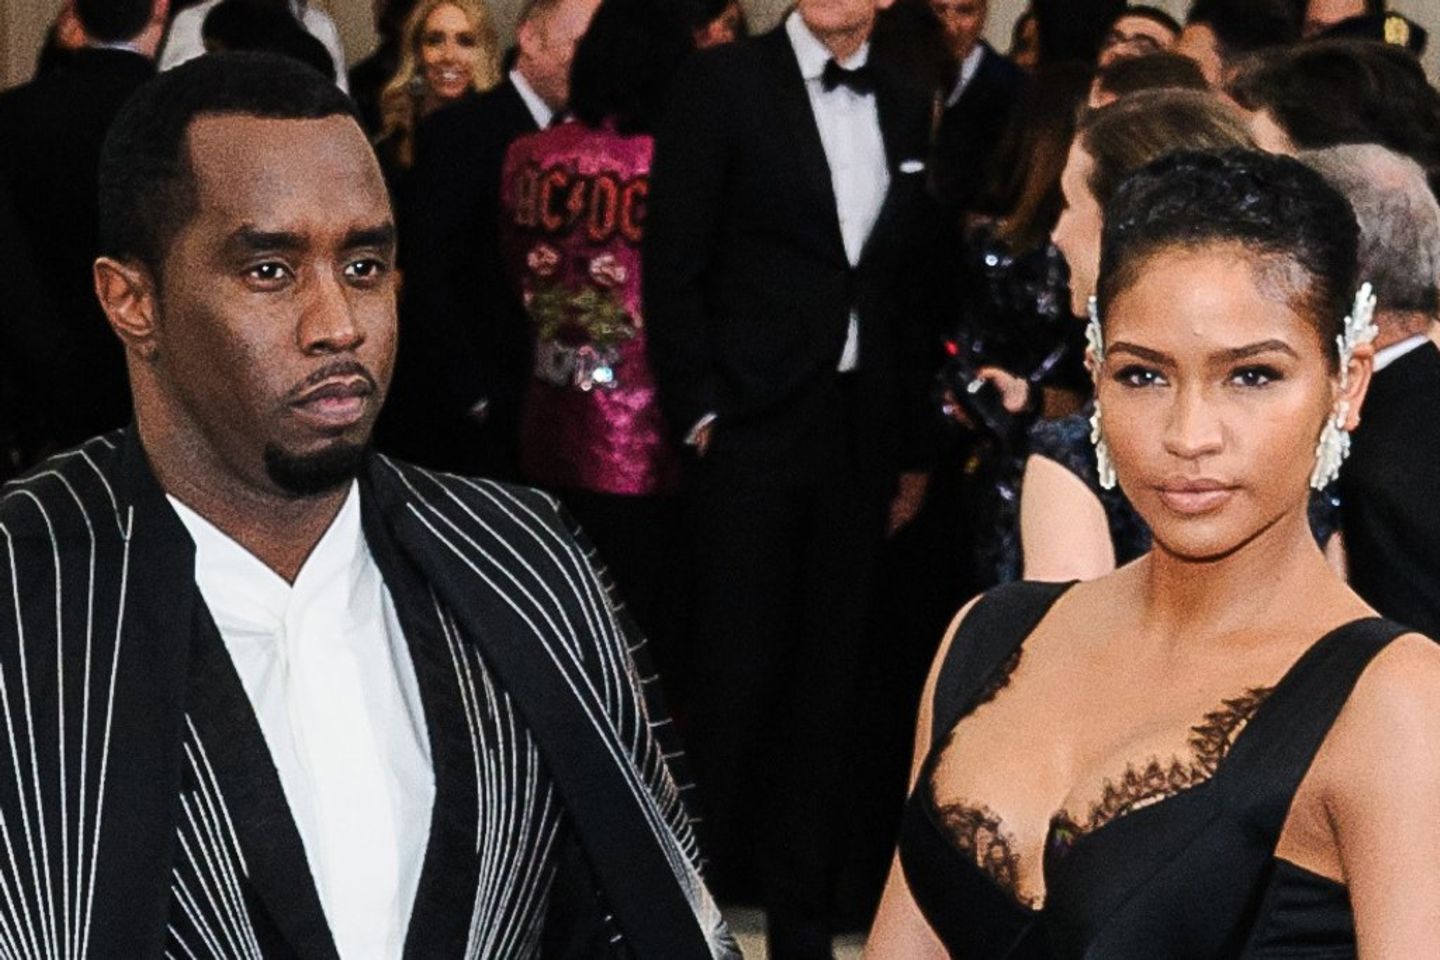 Singer Cassie?s lawyer speaks on Diddy?s home being�raided amid s3x trafficking claims.